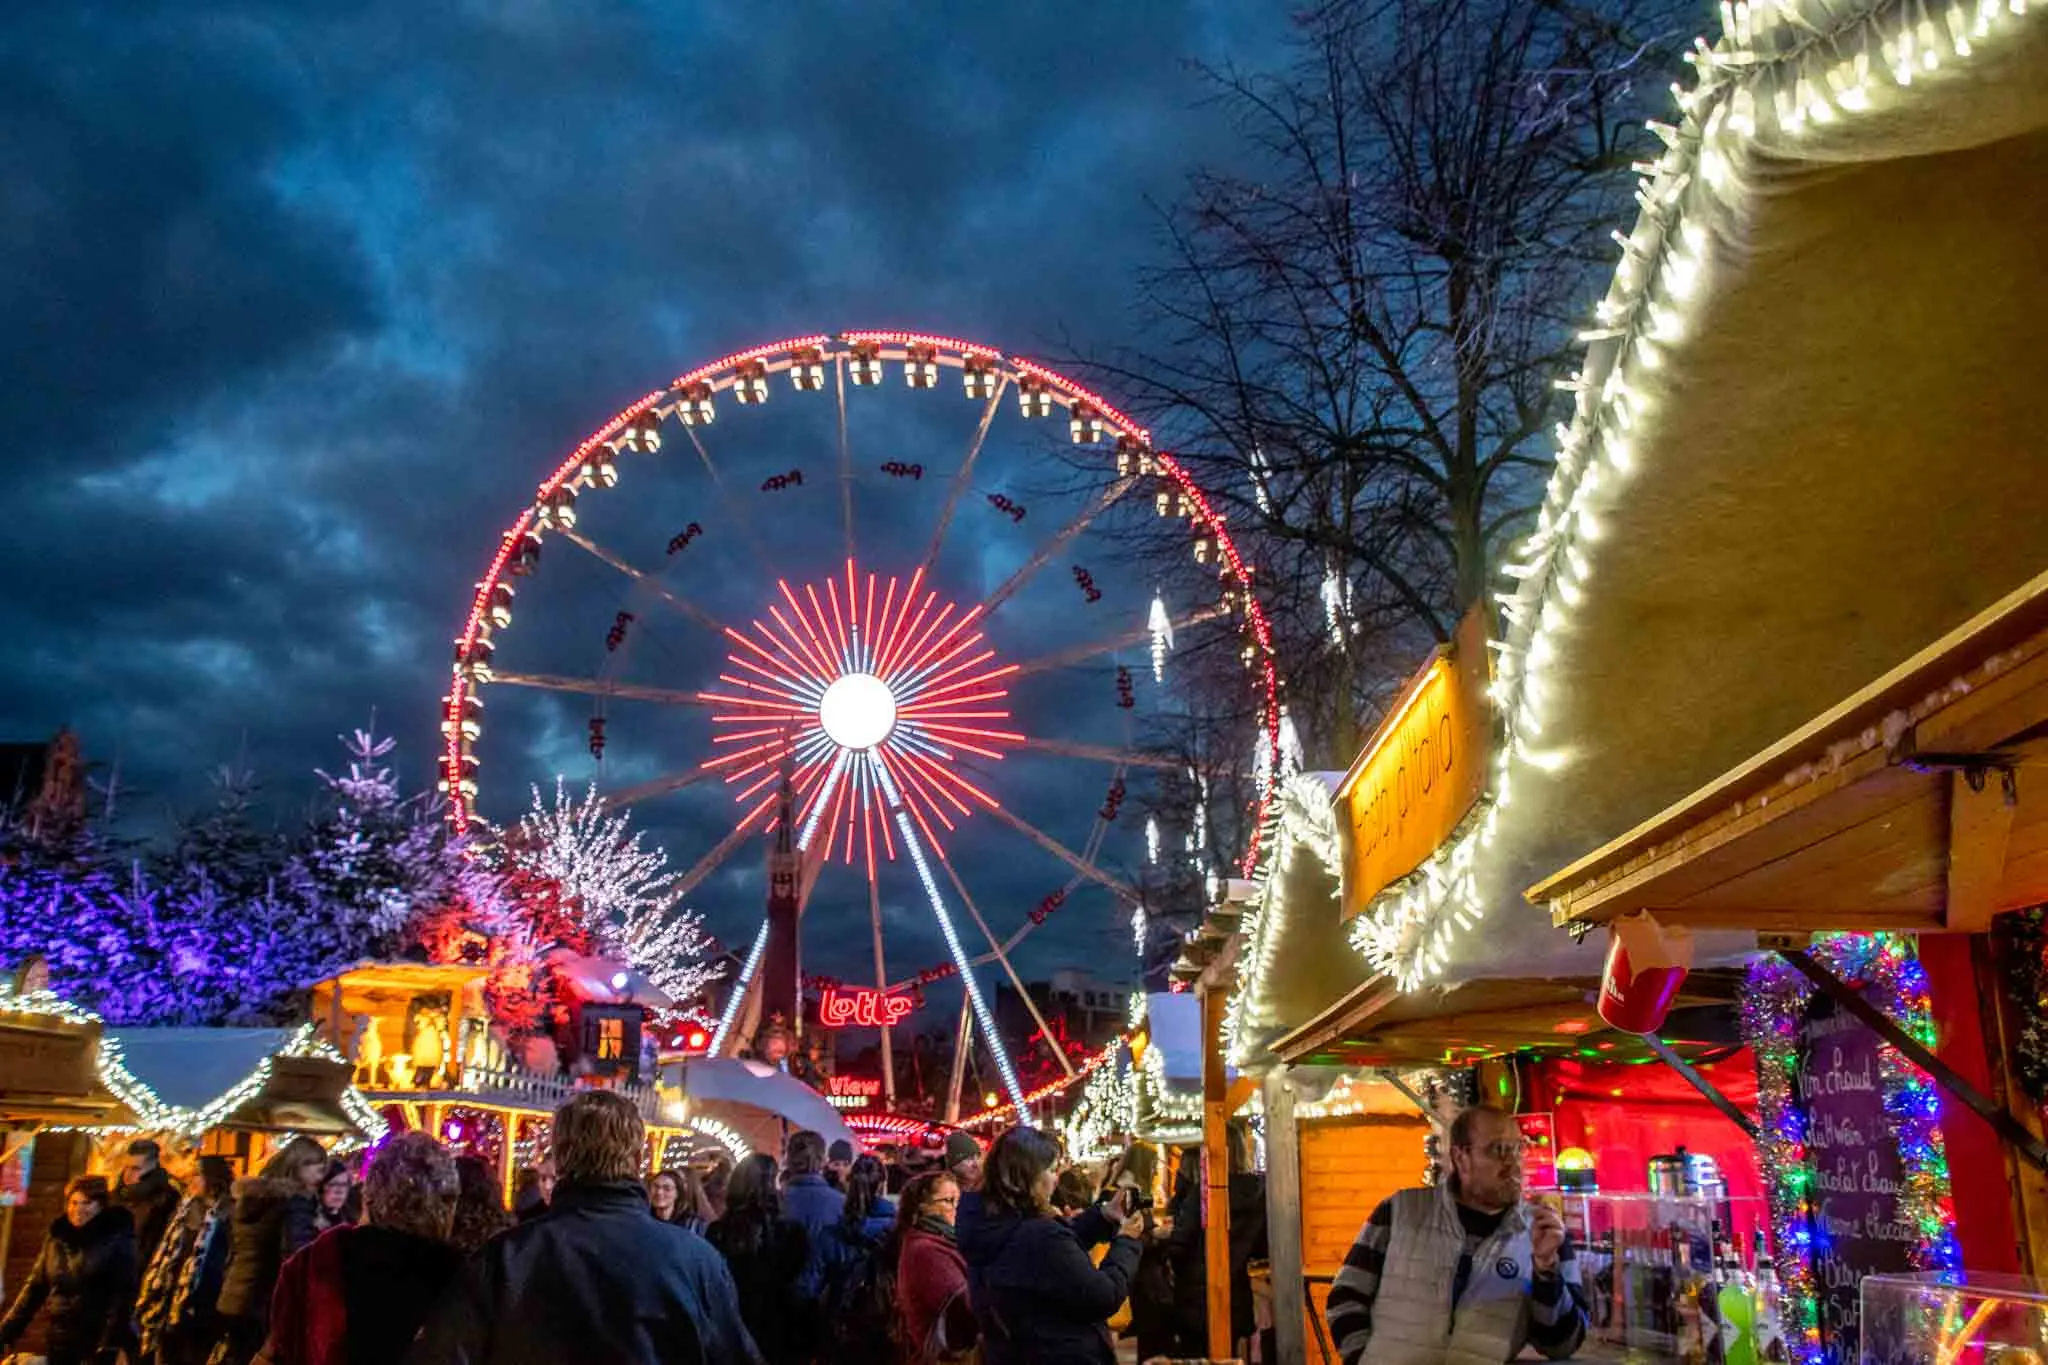 Ferris wheel, vendors, and shoppers at Christmas market.